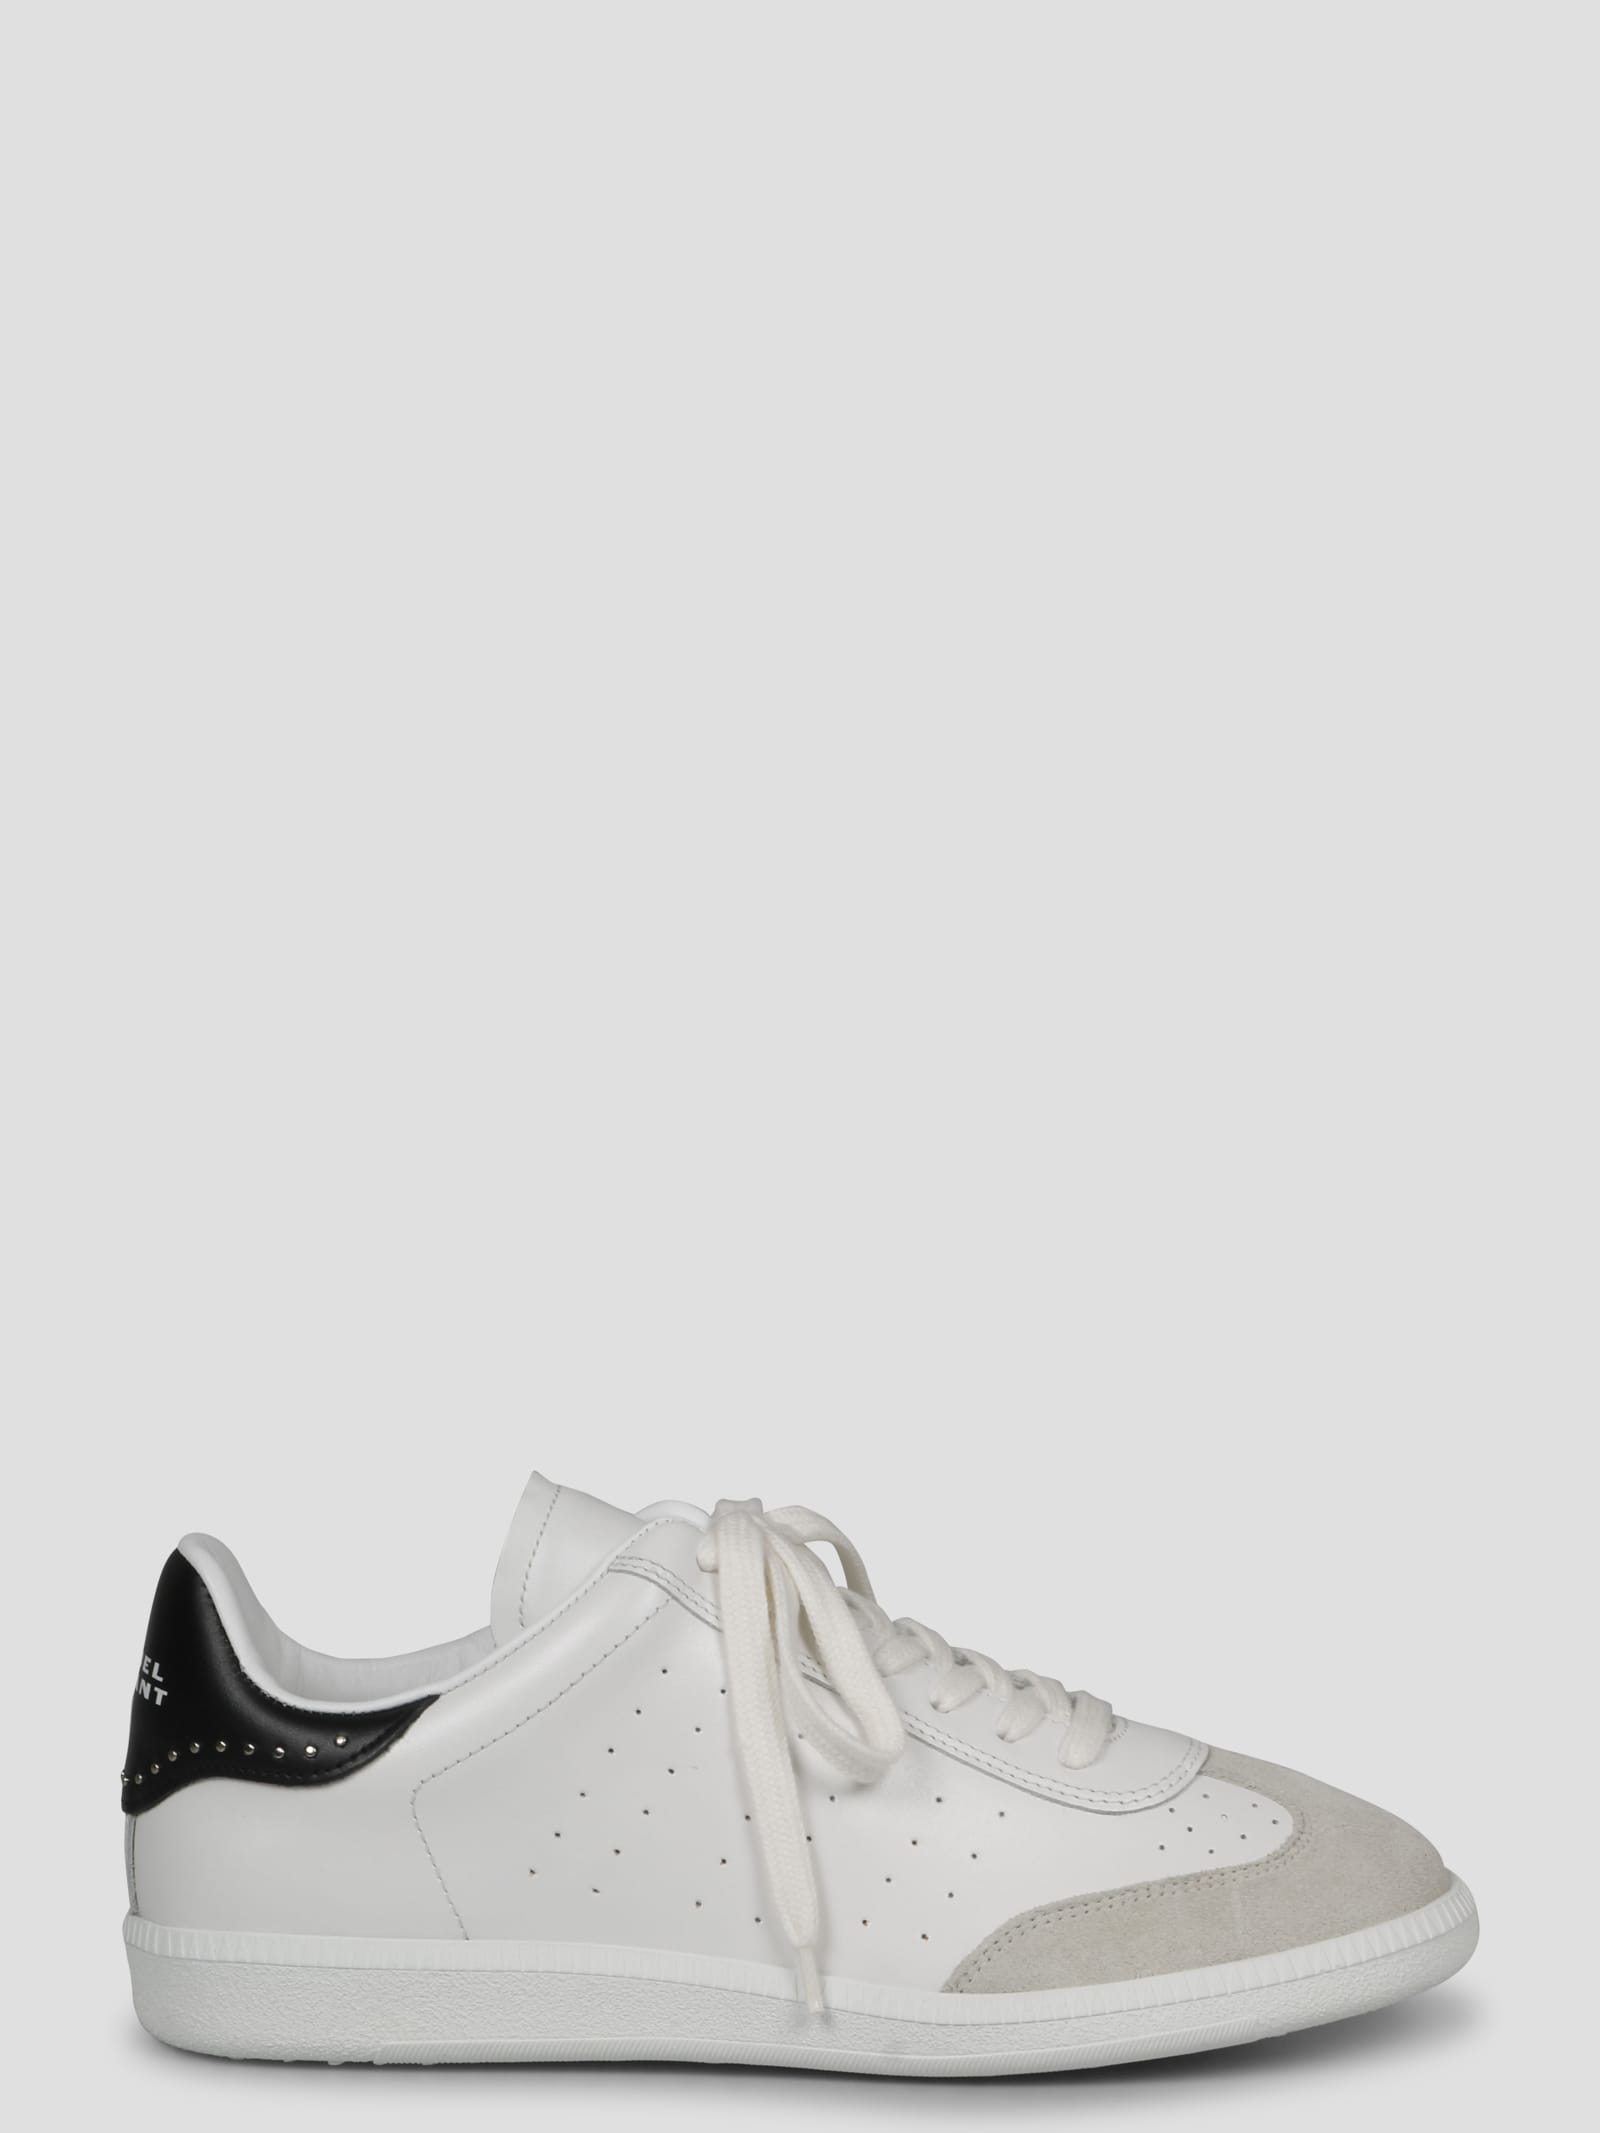 ISABEL MARANT BRYCE STUDDED CLASSIC SNEAKERS